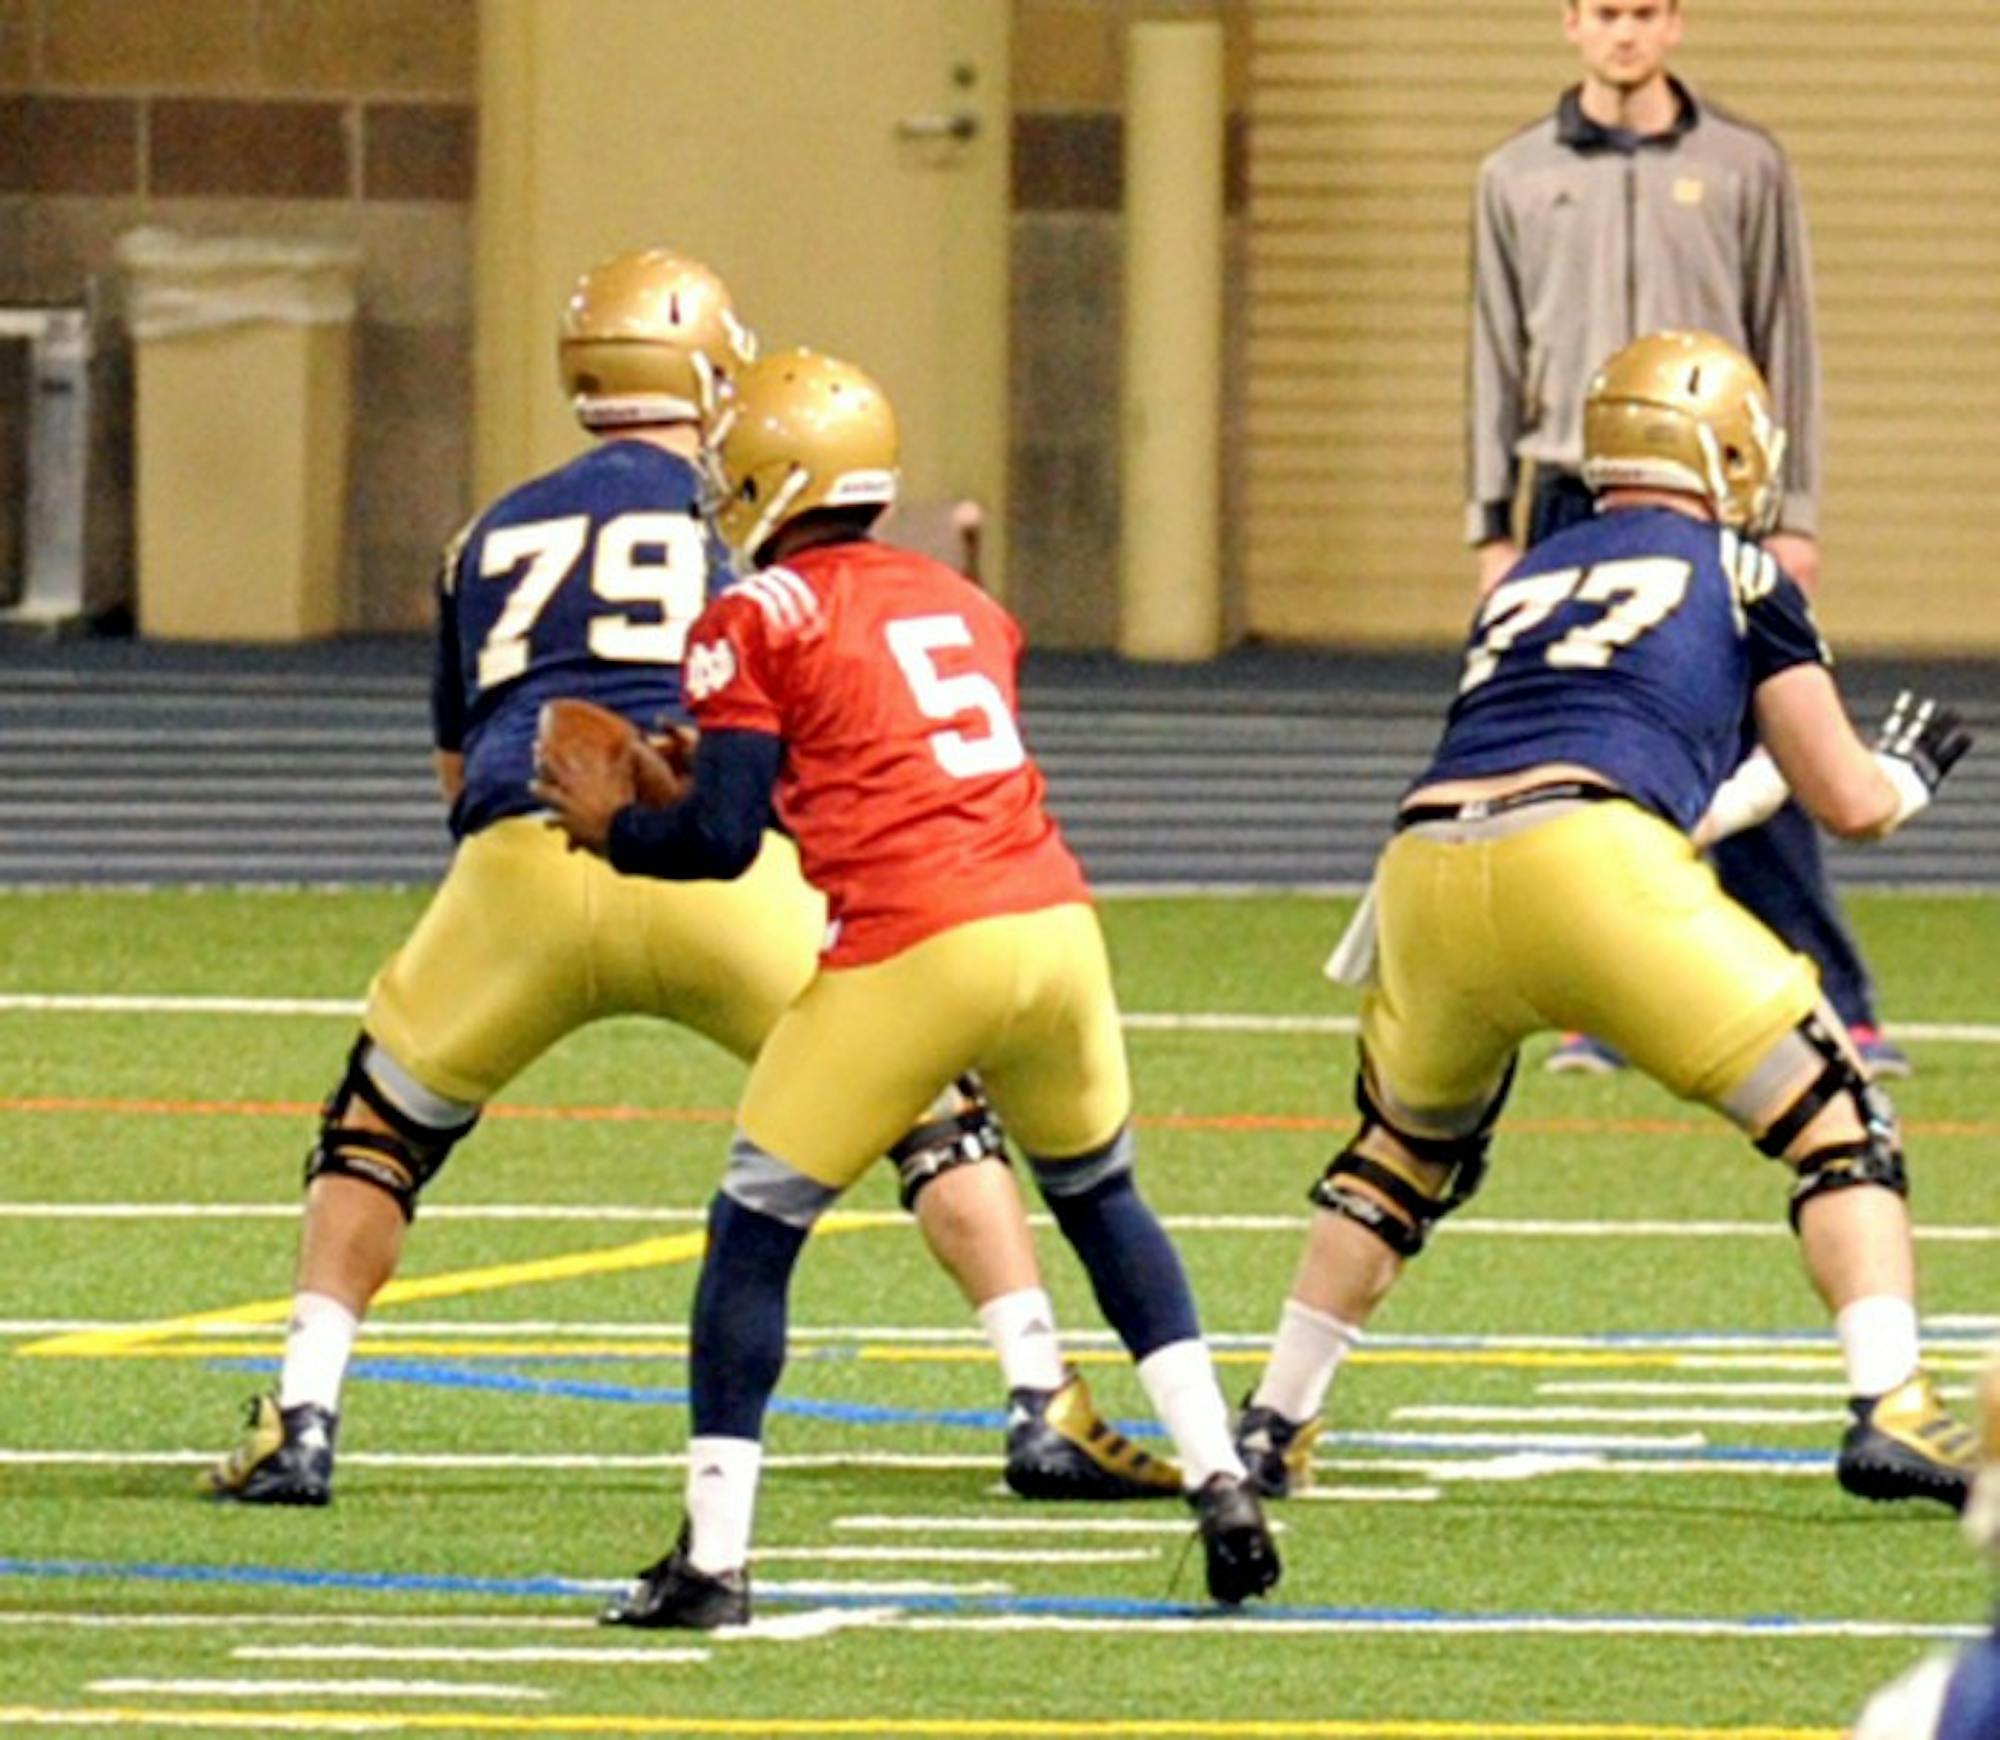 Senior quarterback Everett Golson (5) looks to hand the ball off at Notre Dame's first spring practice Monday at Loftus Sports Center.